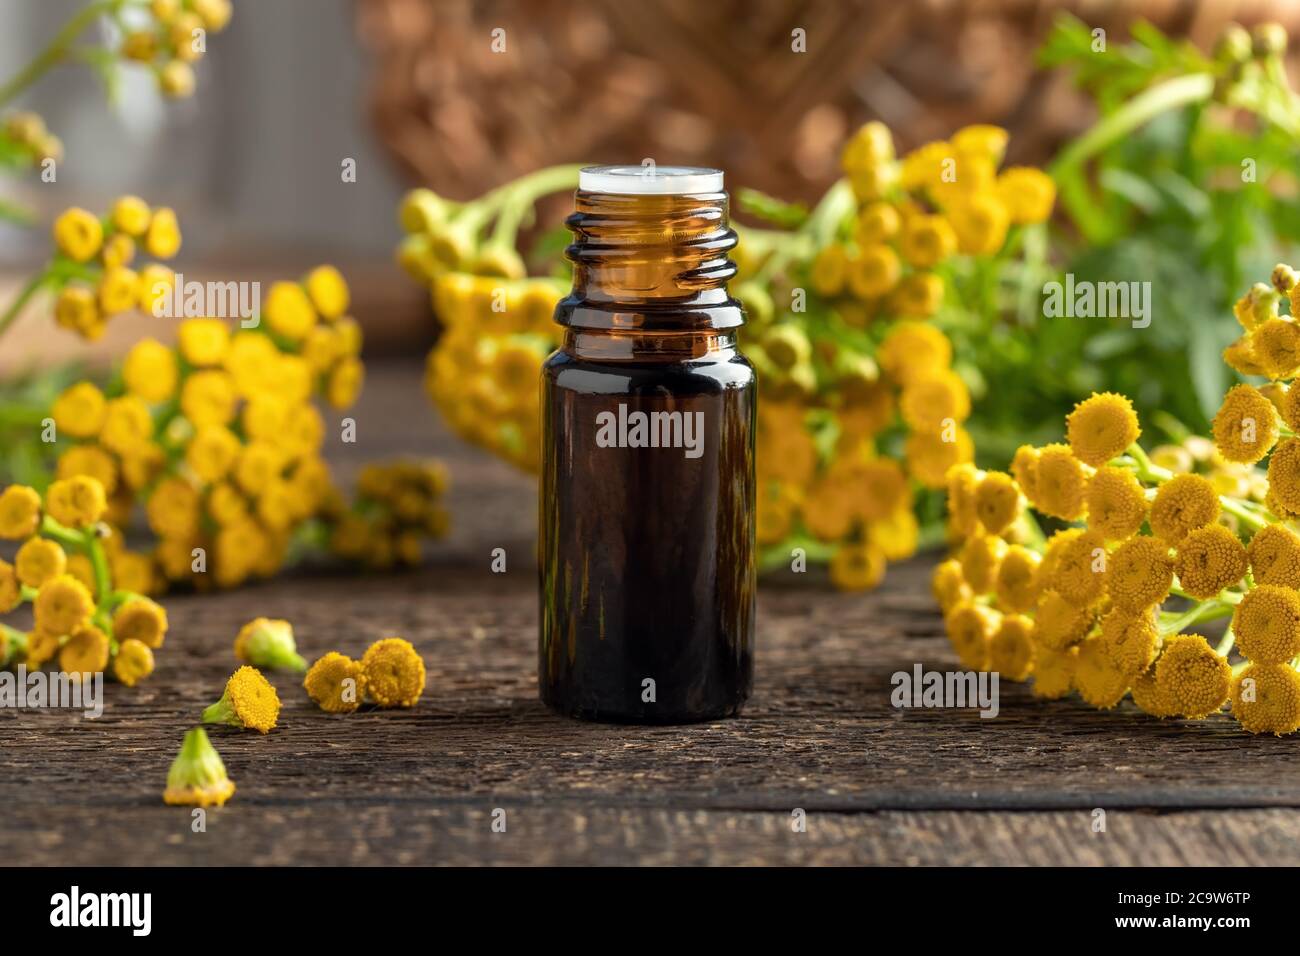 A bottle of common tansy essential oil with fresh blooming Tanacetum vulgare plant on a table Stock Photo